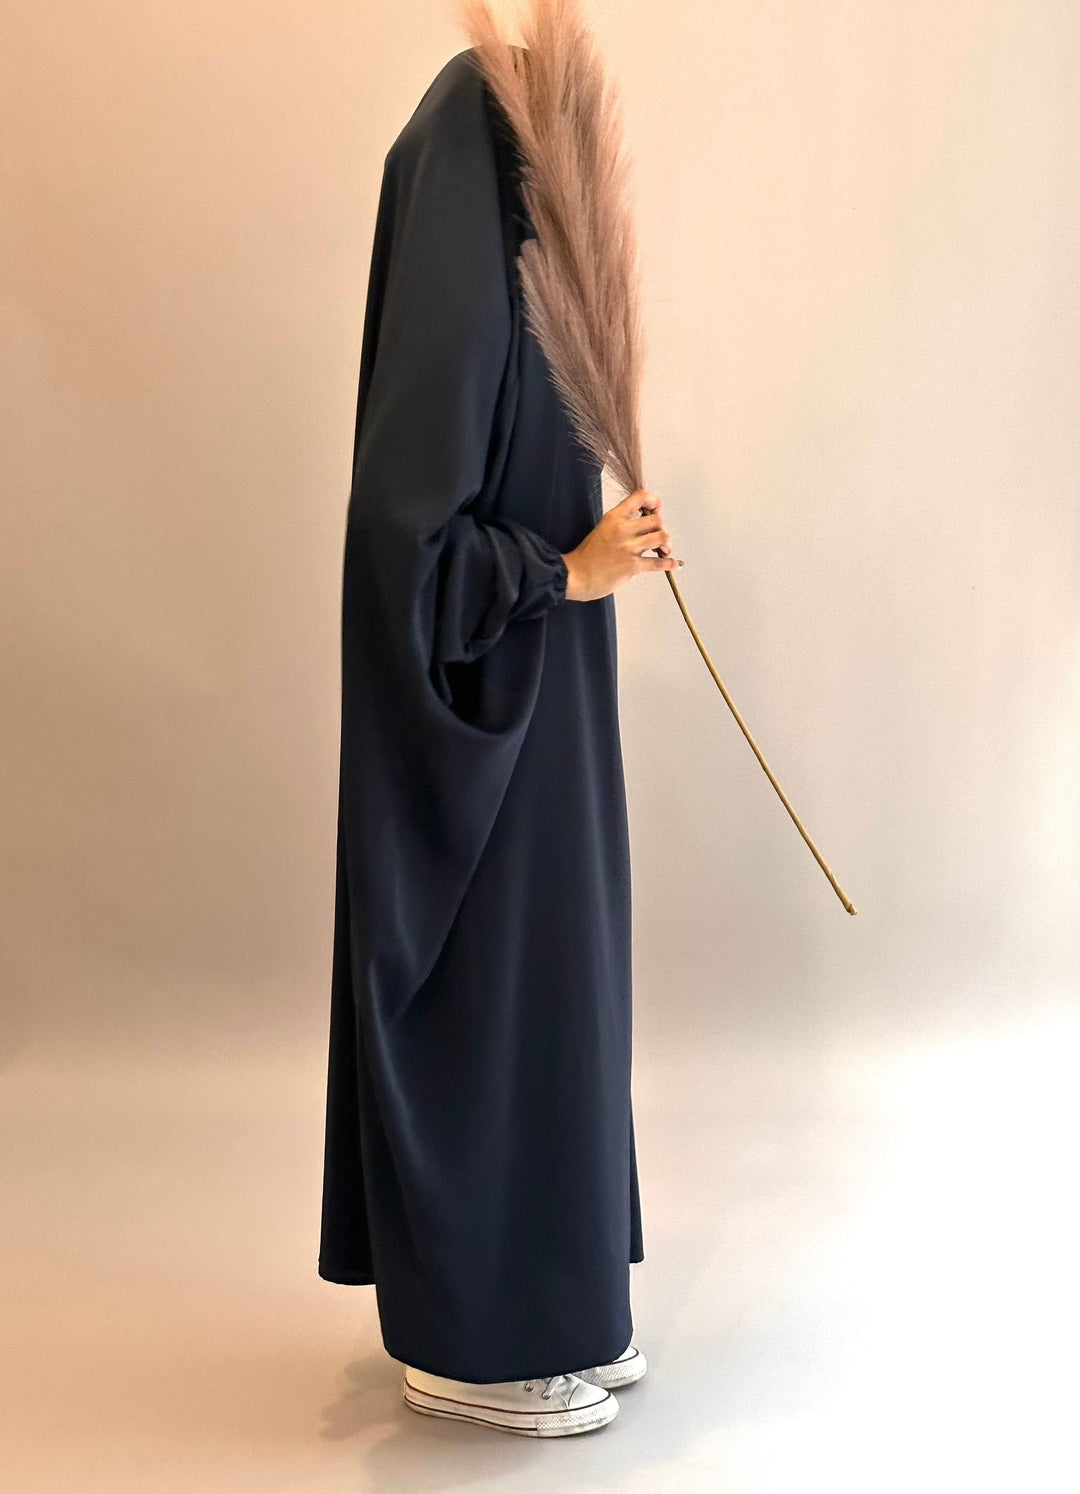 Get trendy with Sarah Niqab Jilbab - Navy -  available at Voilee NY. Grab yours for $17.99 today!